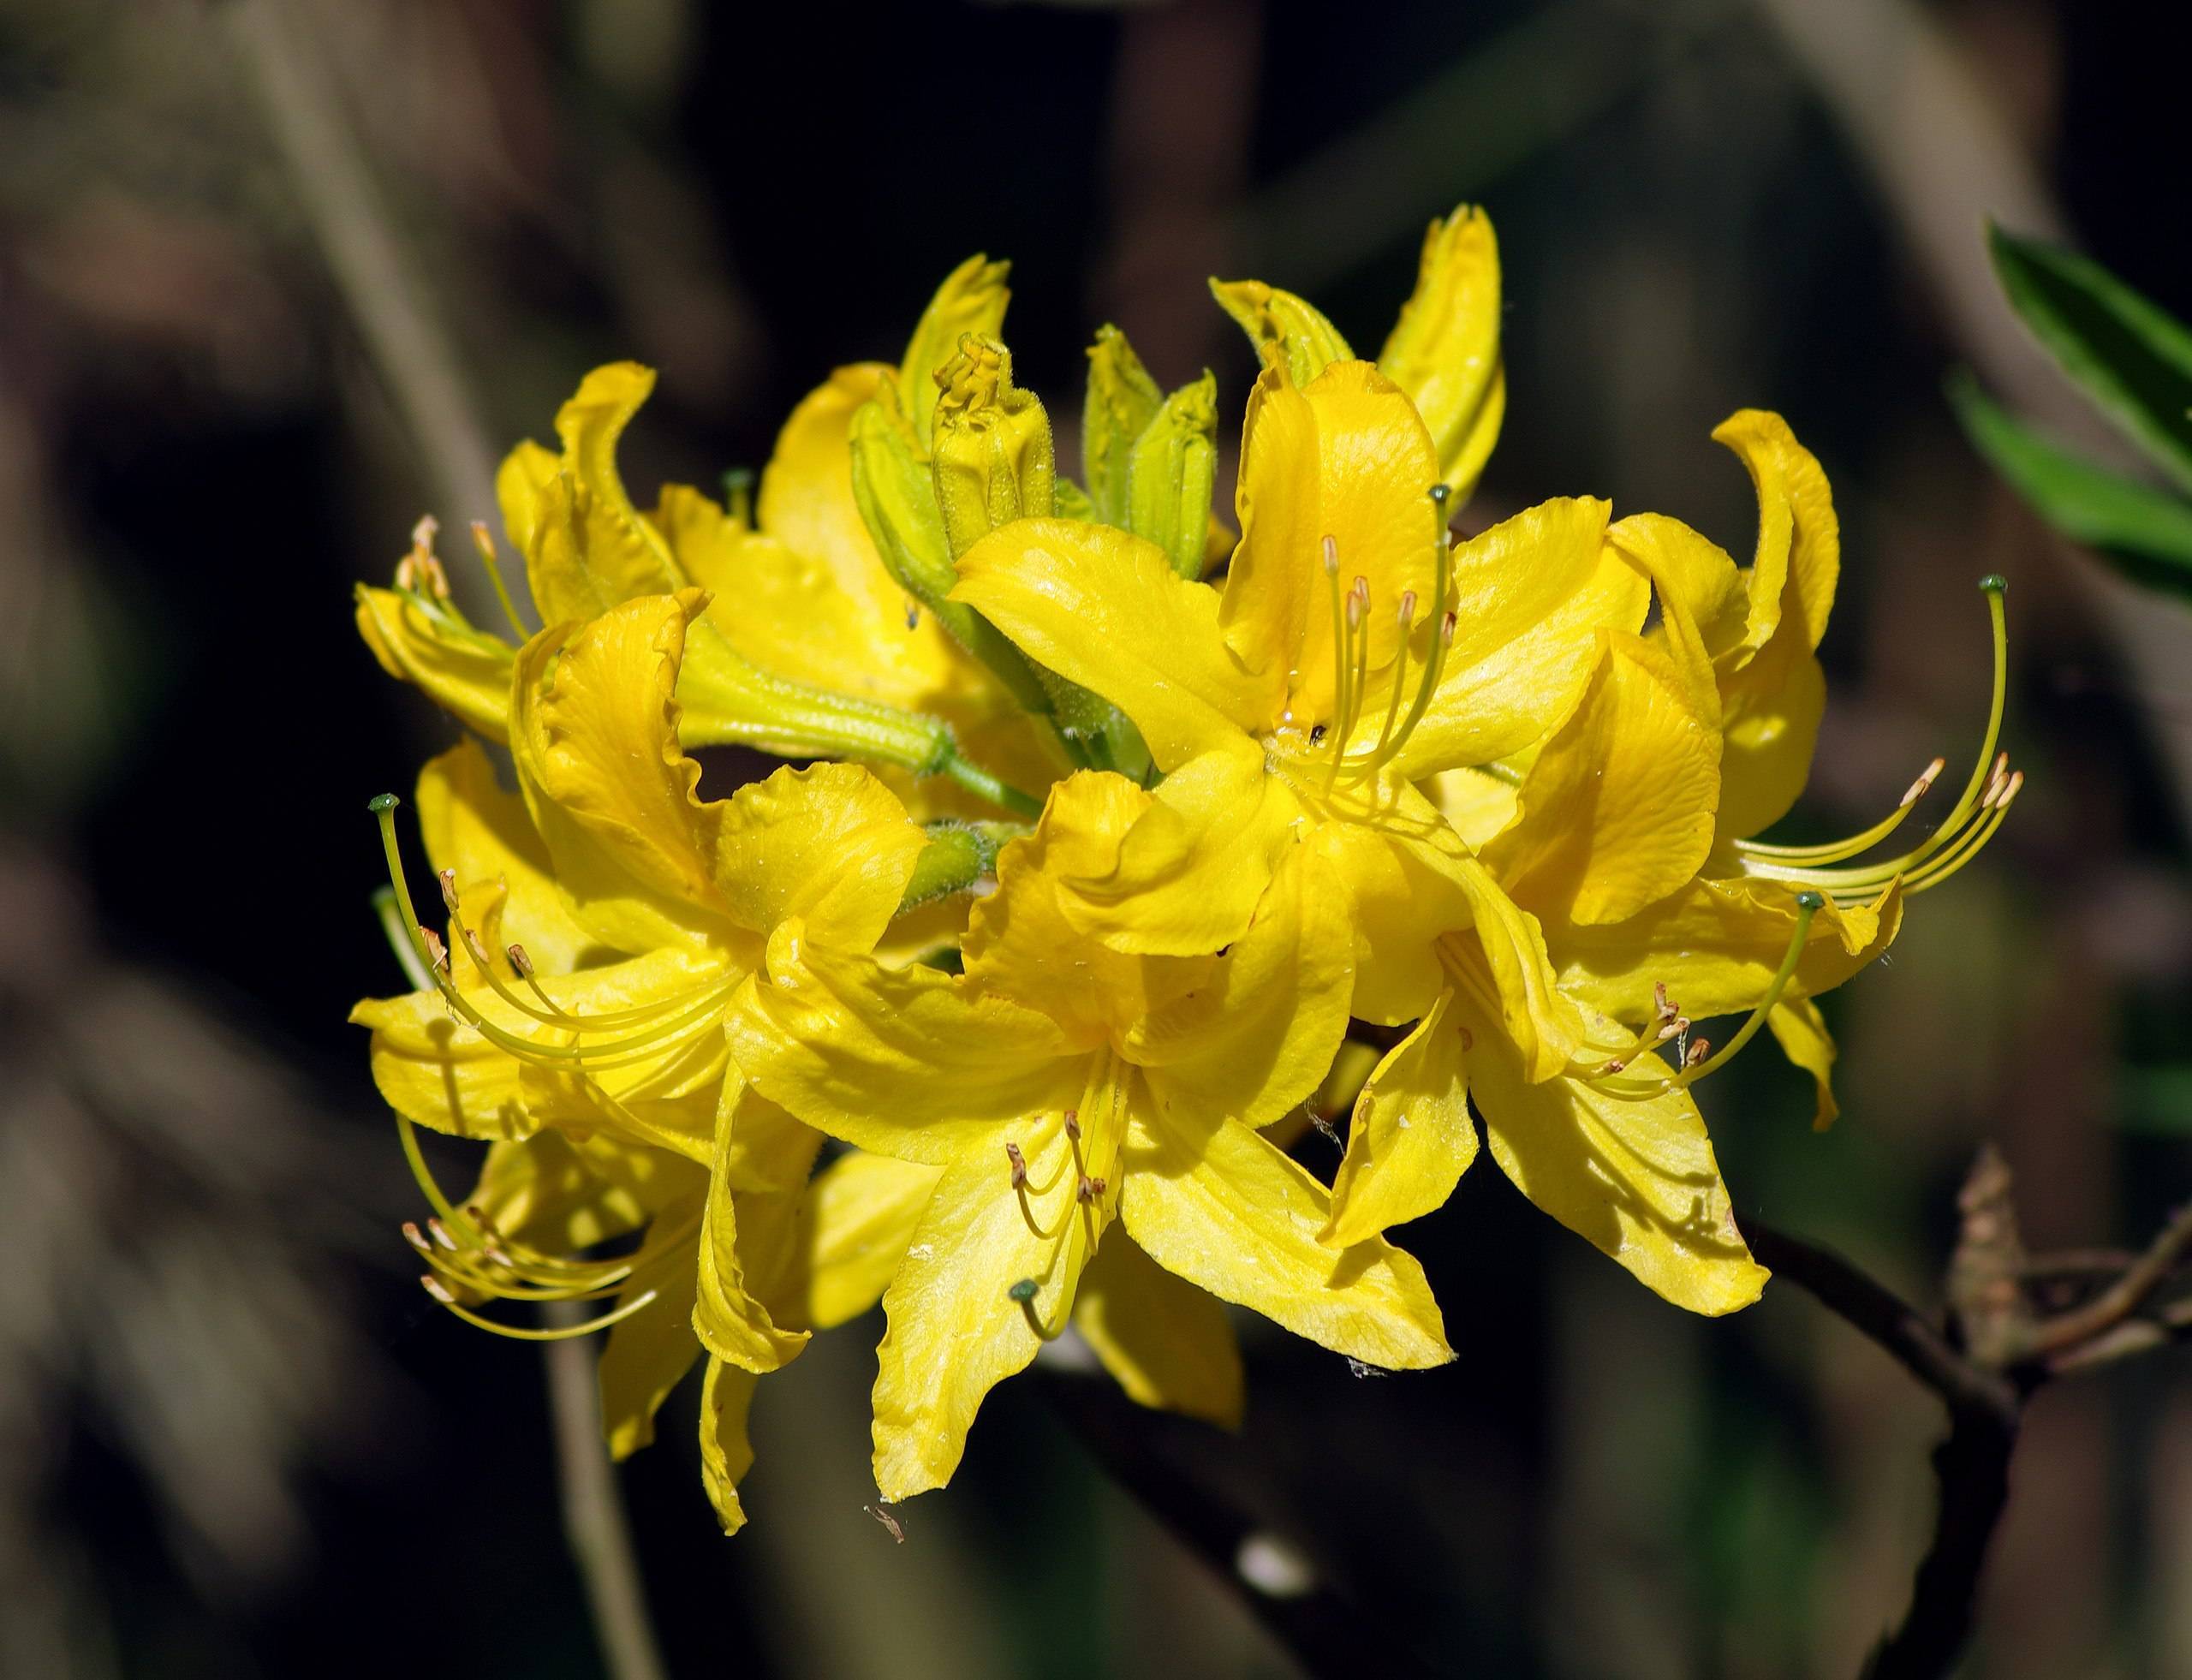 yellow-green flowers with yellow filaments, brown anthers, and lime-yellow buds